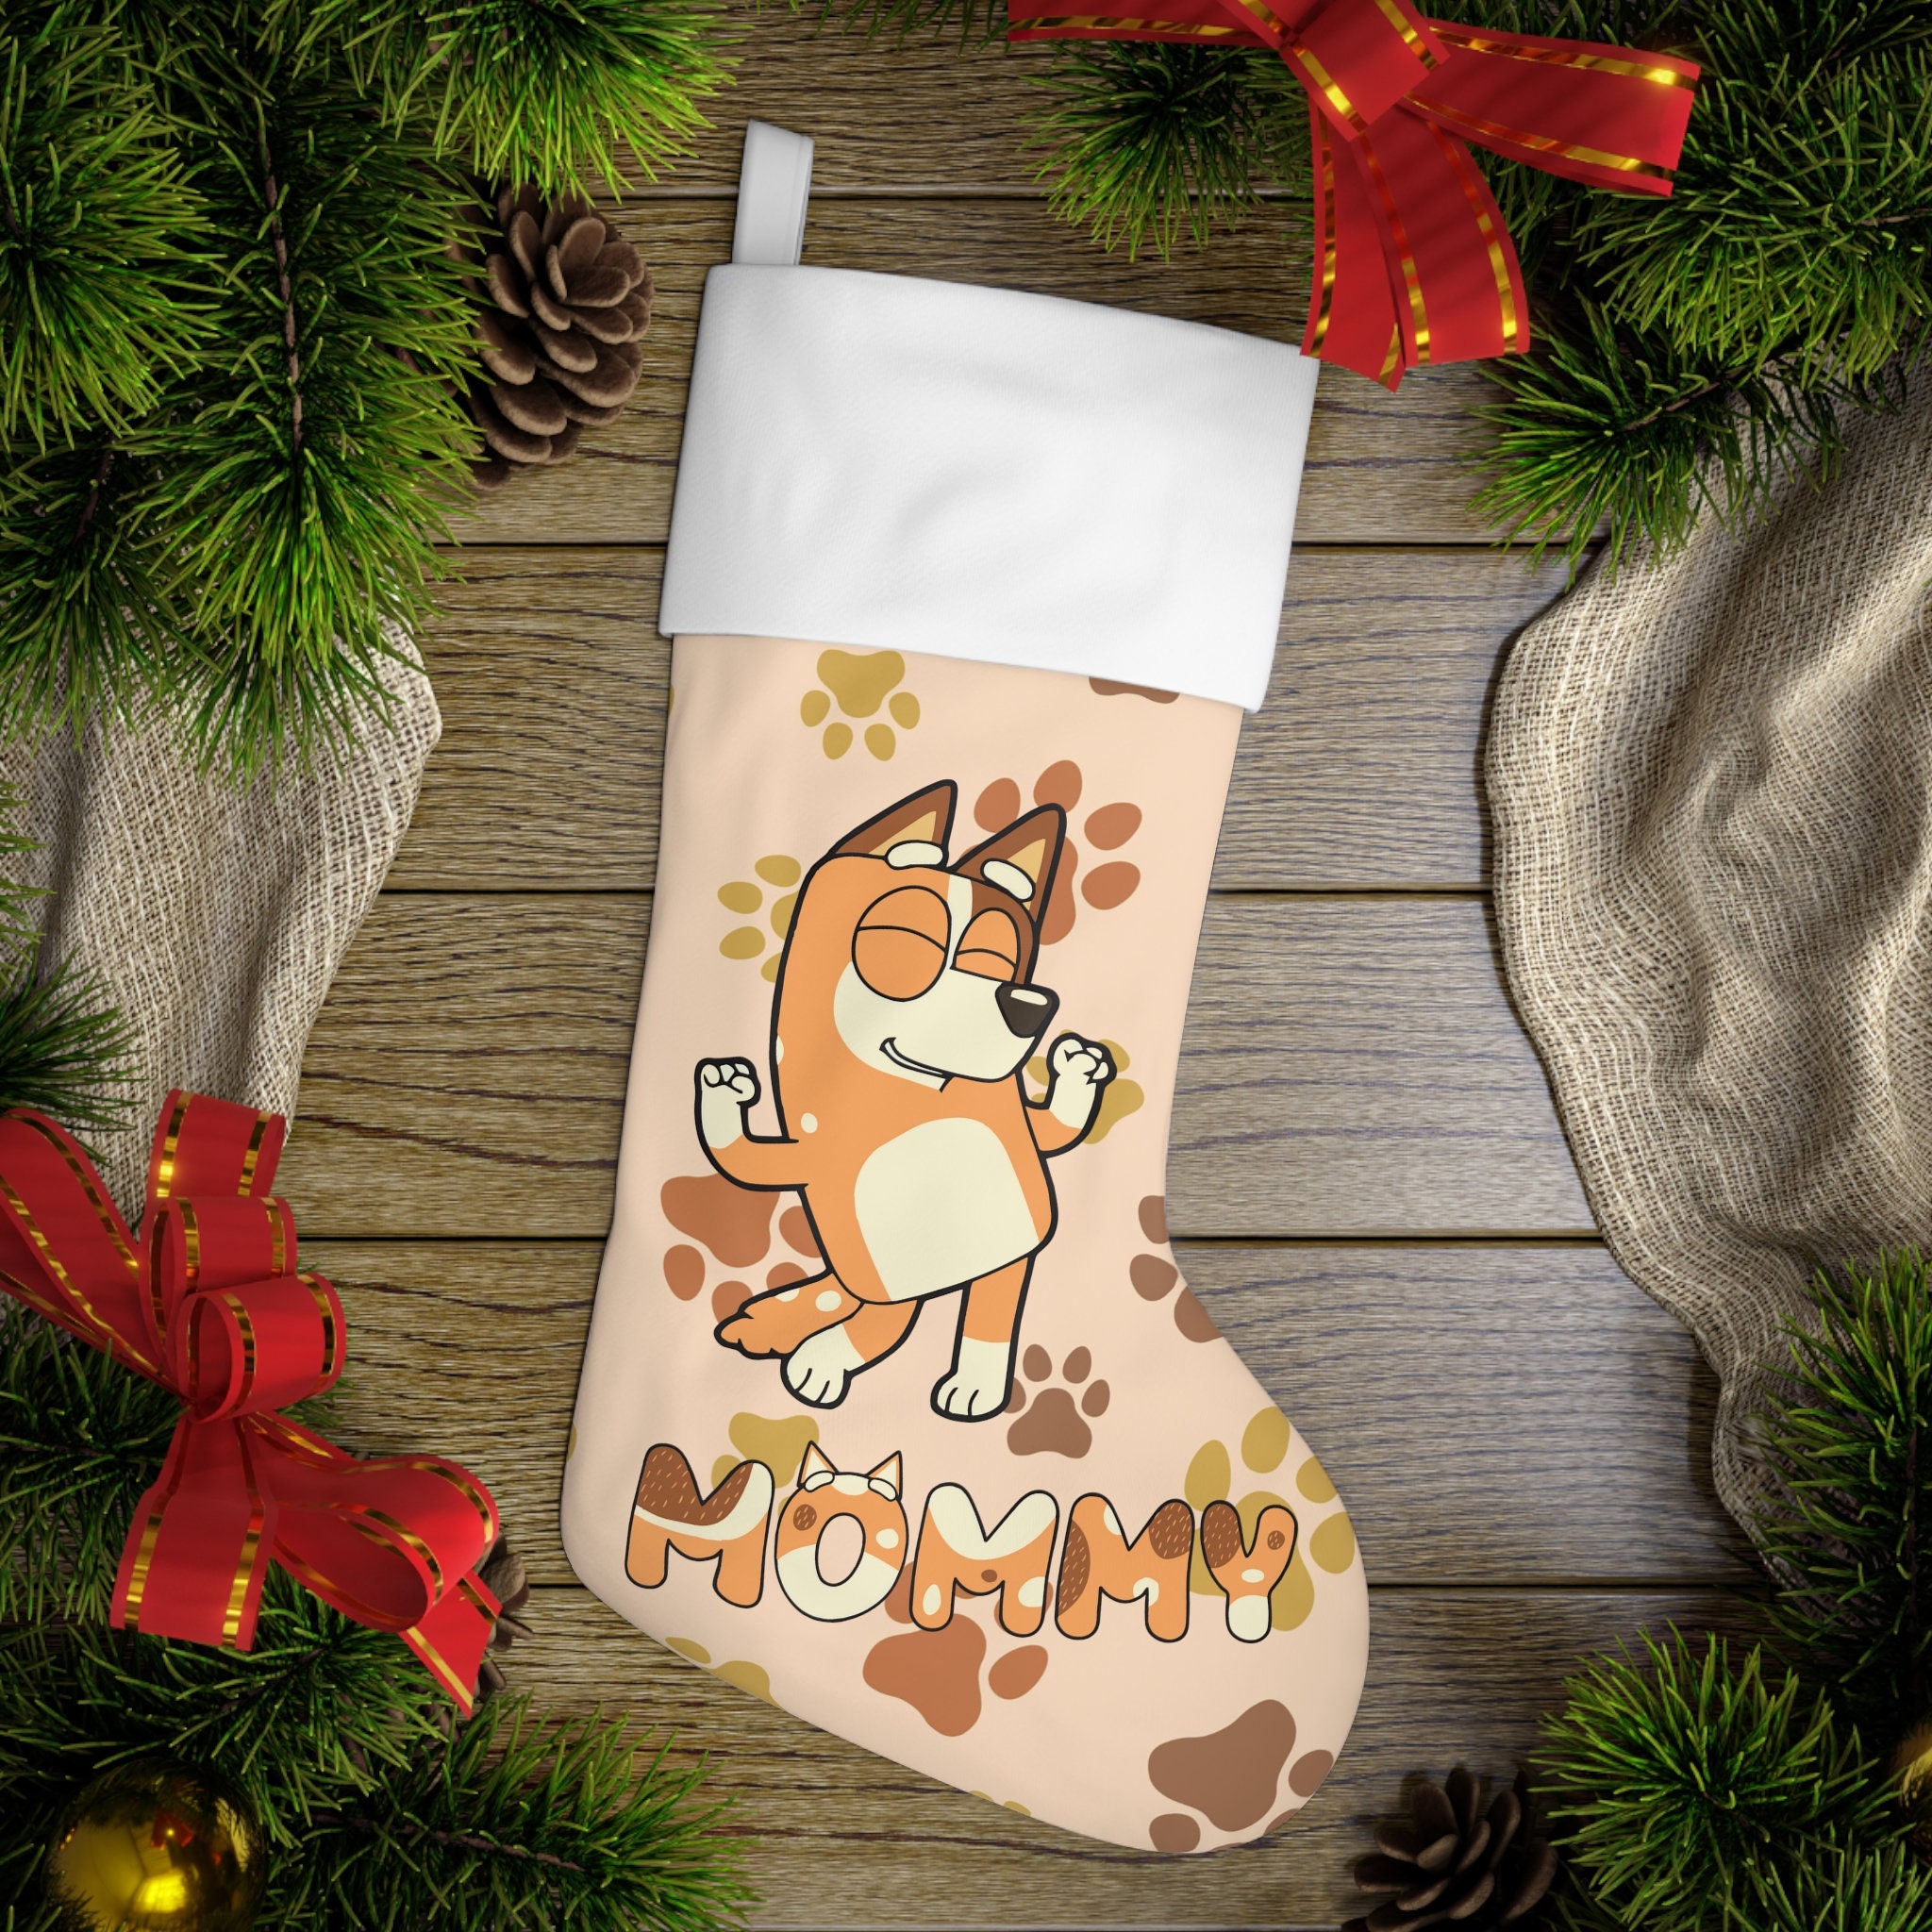 Discover Personalized BlueyDad Christmas Stocking, BlueyDad Family Christmas Stocking